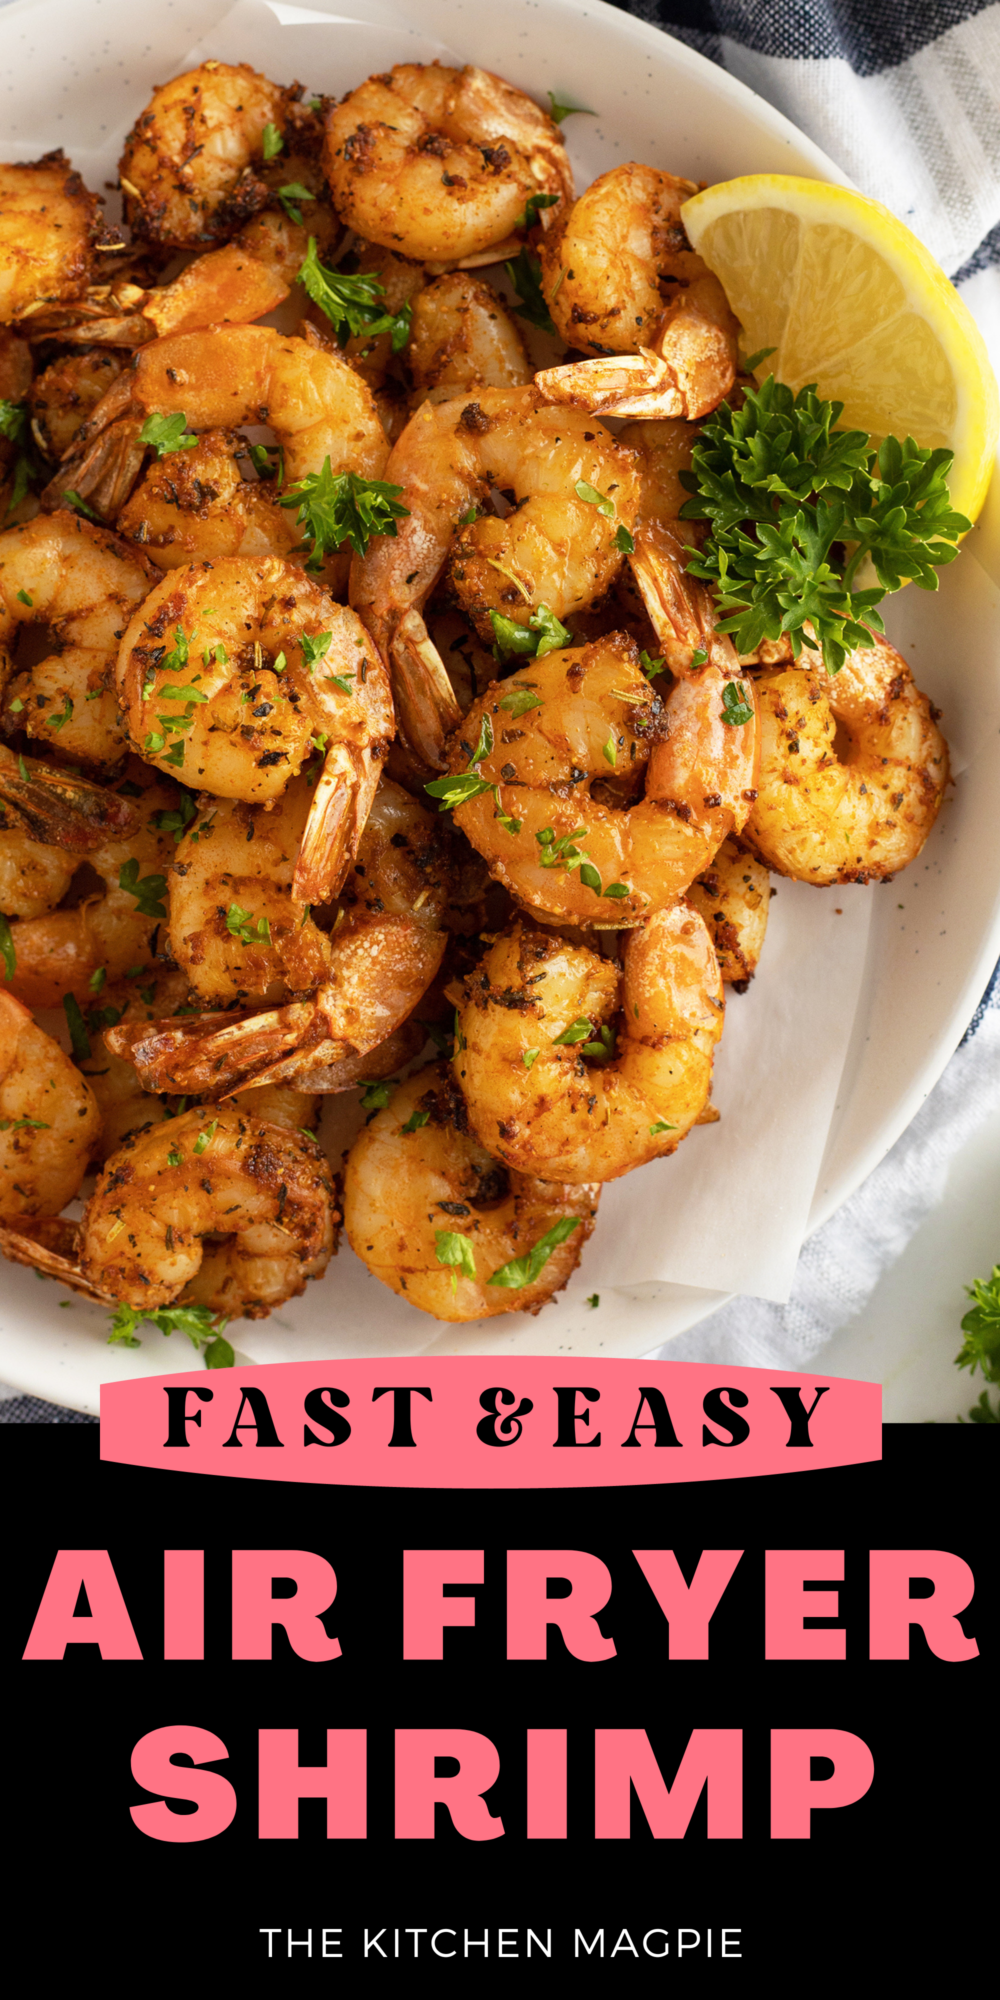 Using the tasty shrimp seasoning and the air fryer makes for an easy and fast way to prepare a quick weeknight meal.